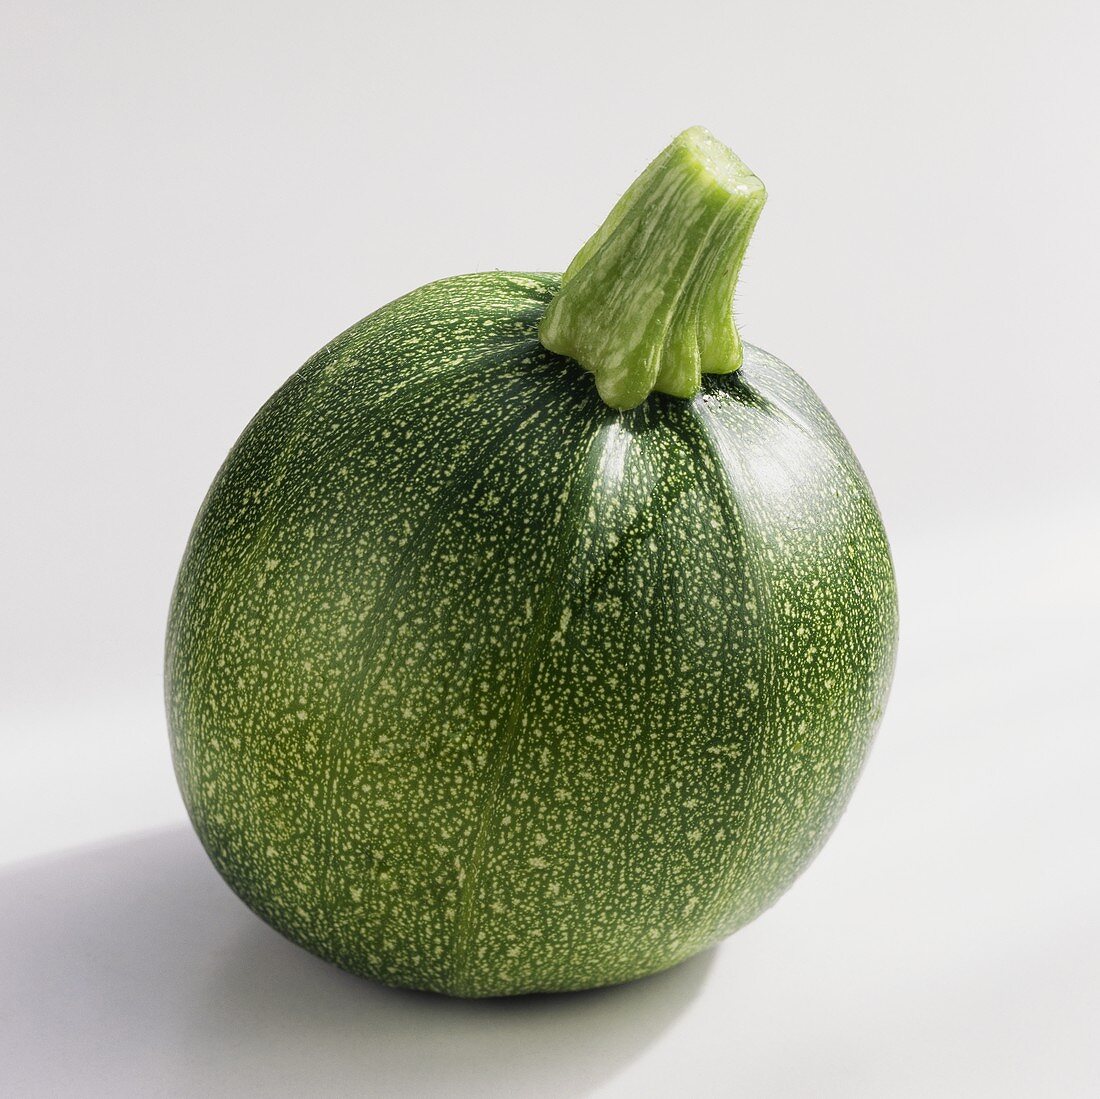 Round courgette 'Eight ball F1 hybrid'